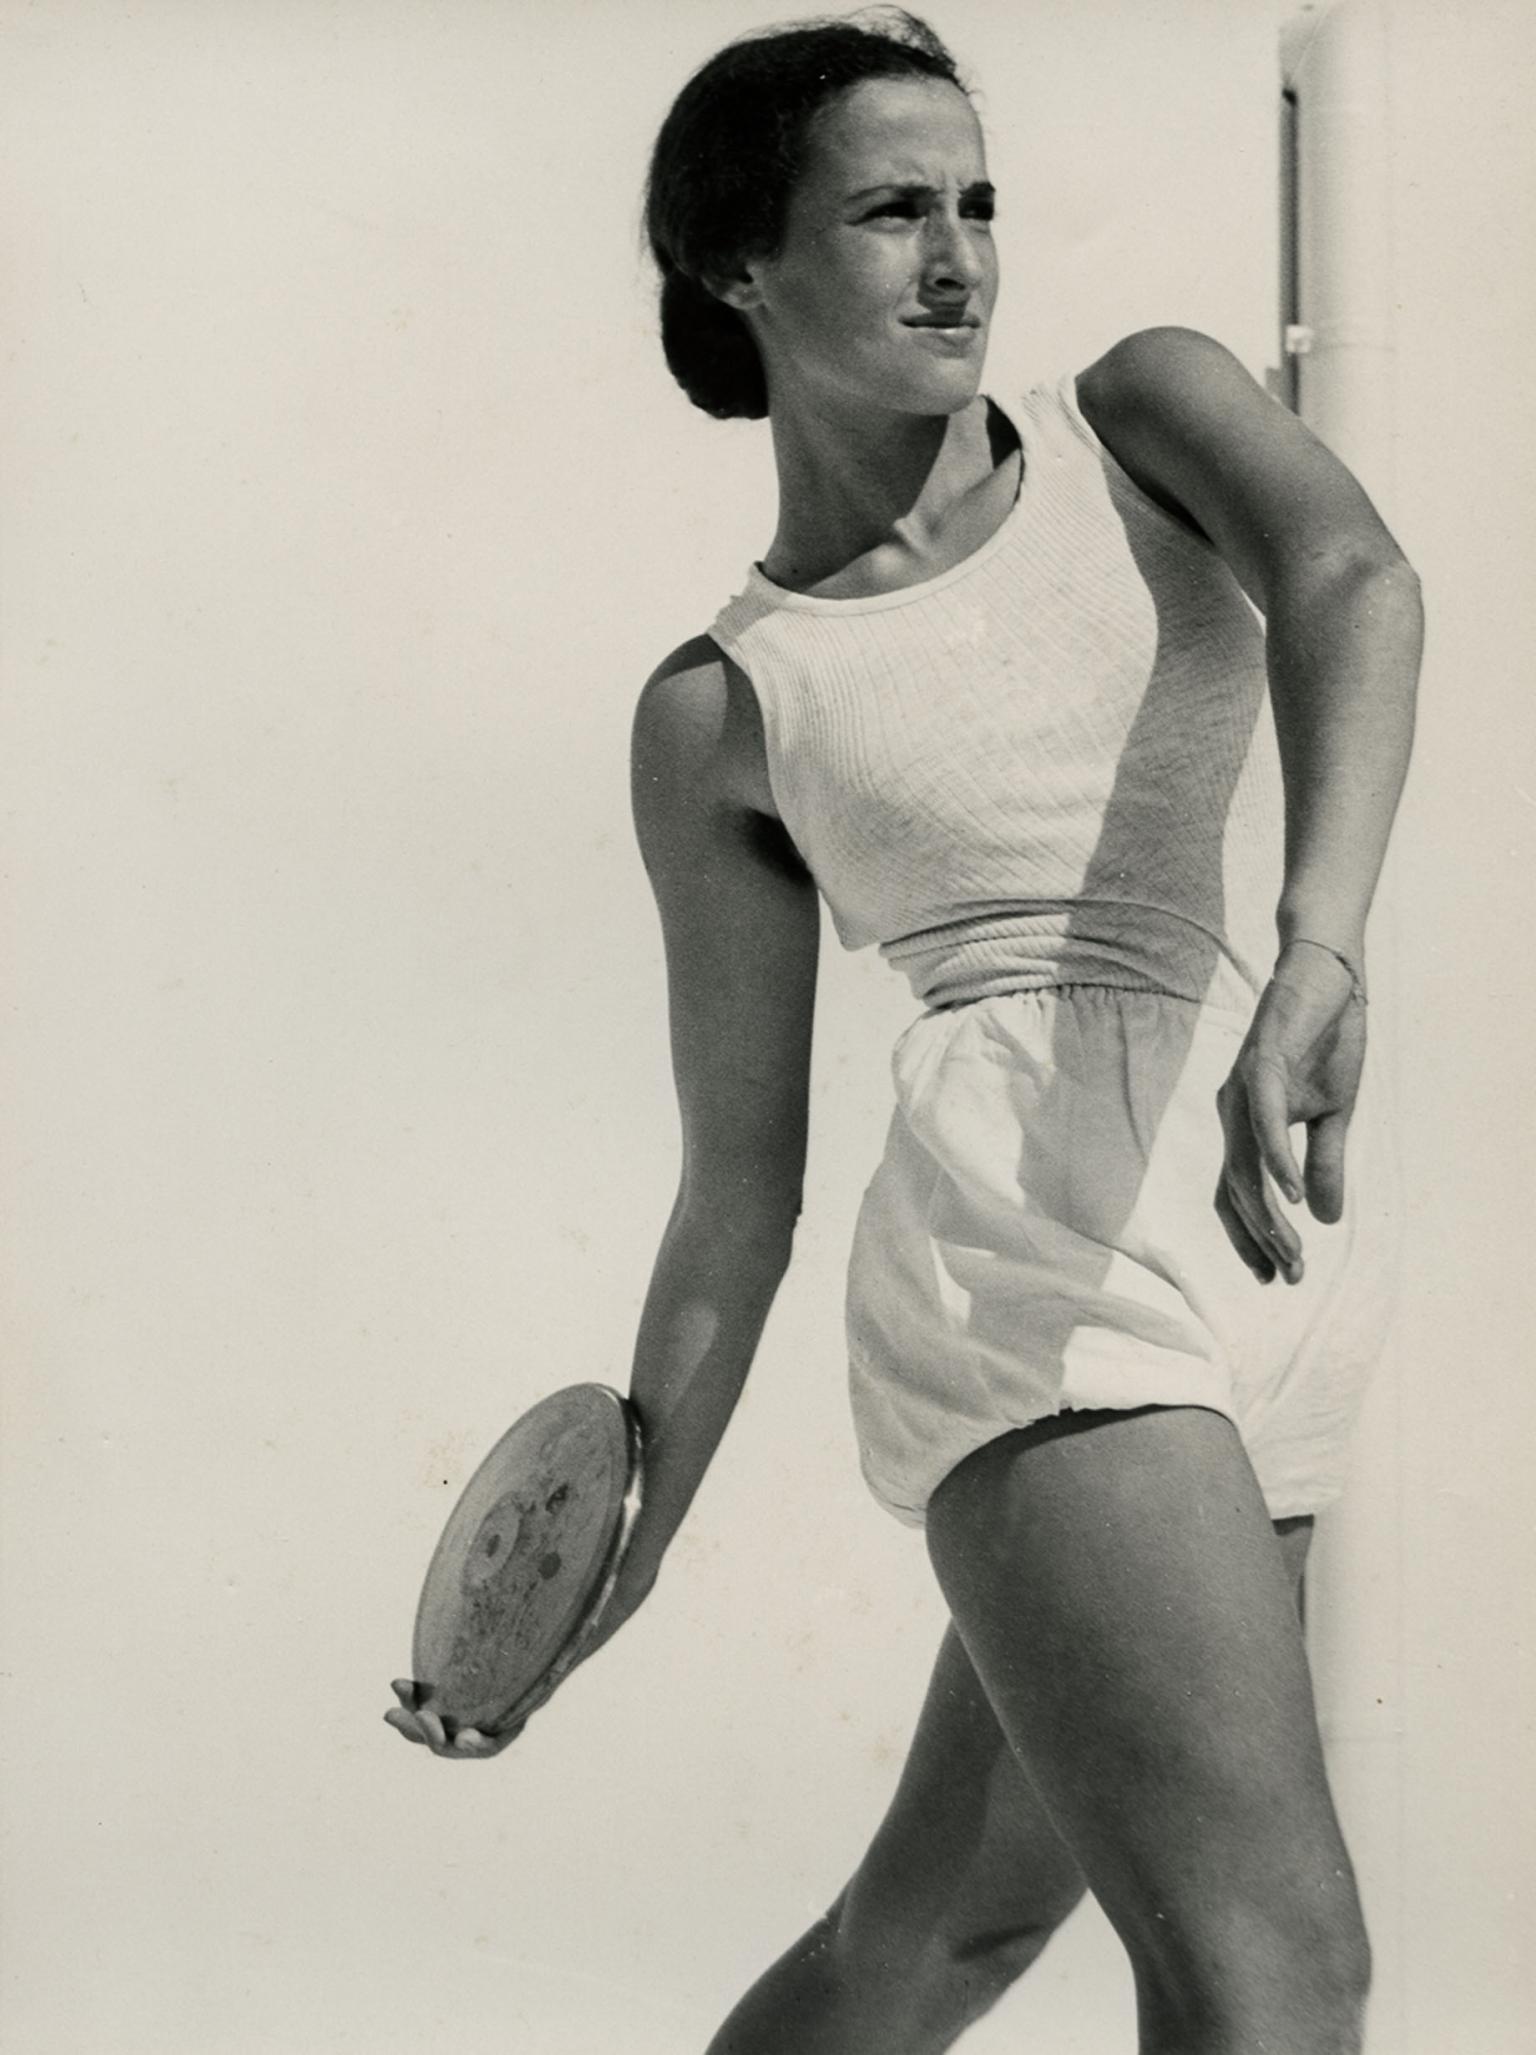 Photograph of female athlete assuming position to throw a discus.